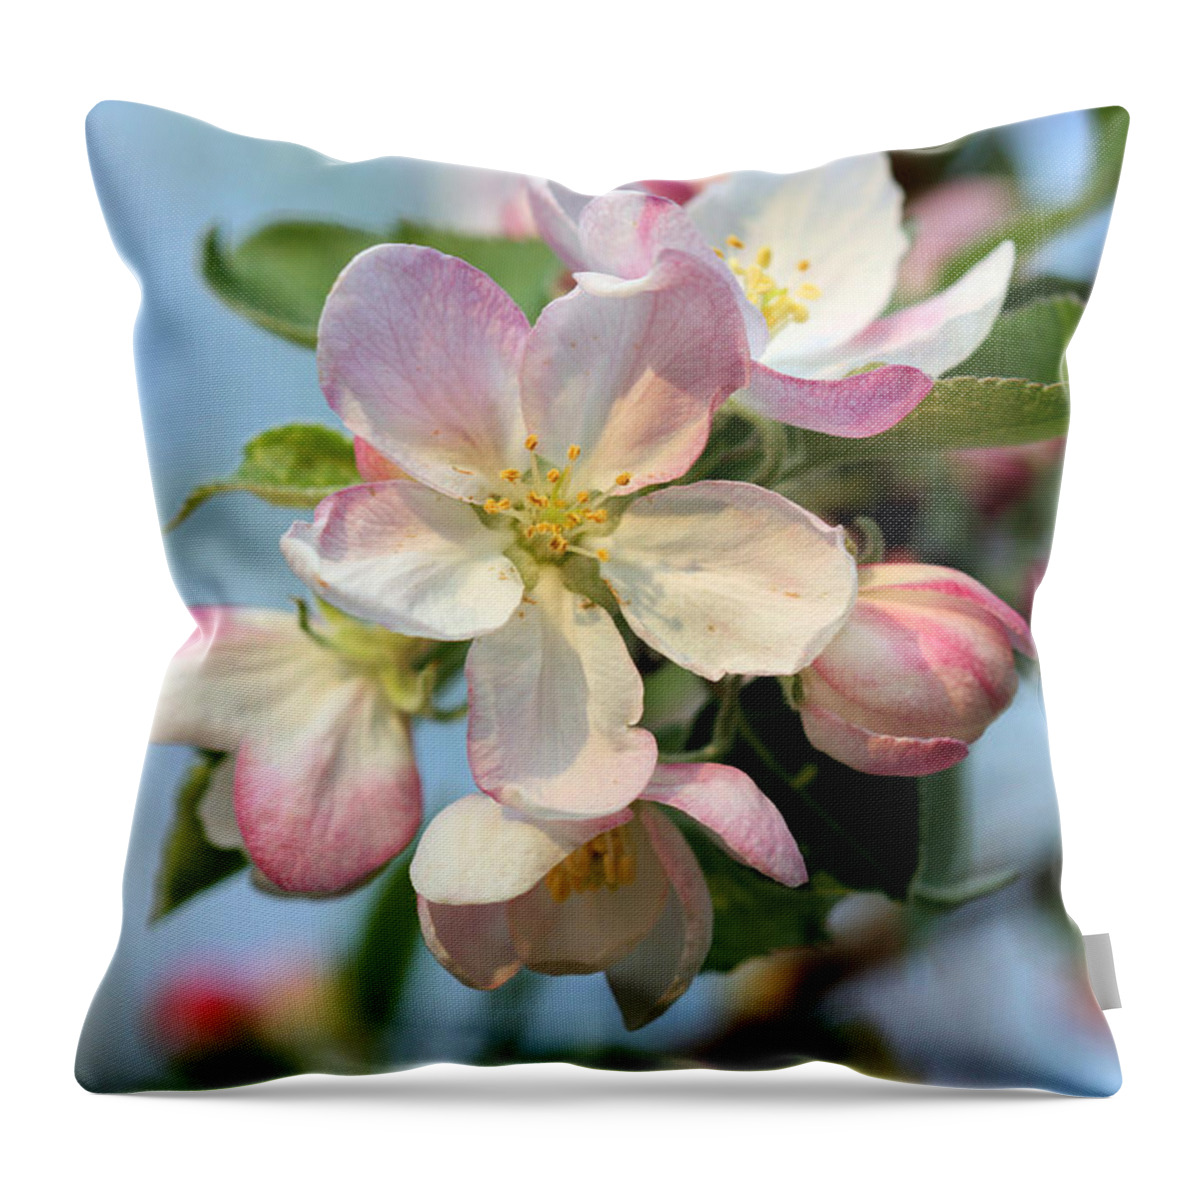 Apple Blossom Throw Pillow featuring the photograph Apple Blossom #2 by Kristin Elmquist